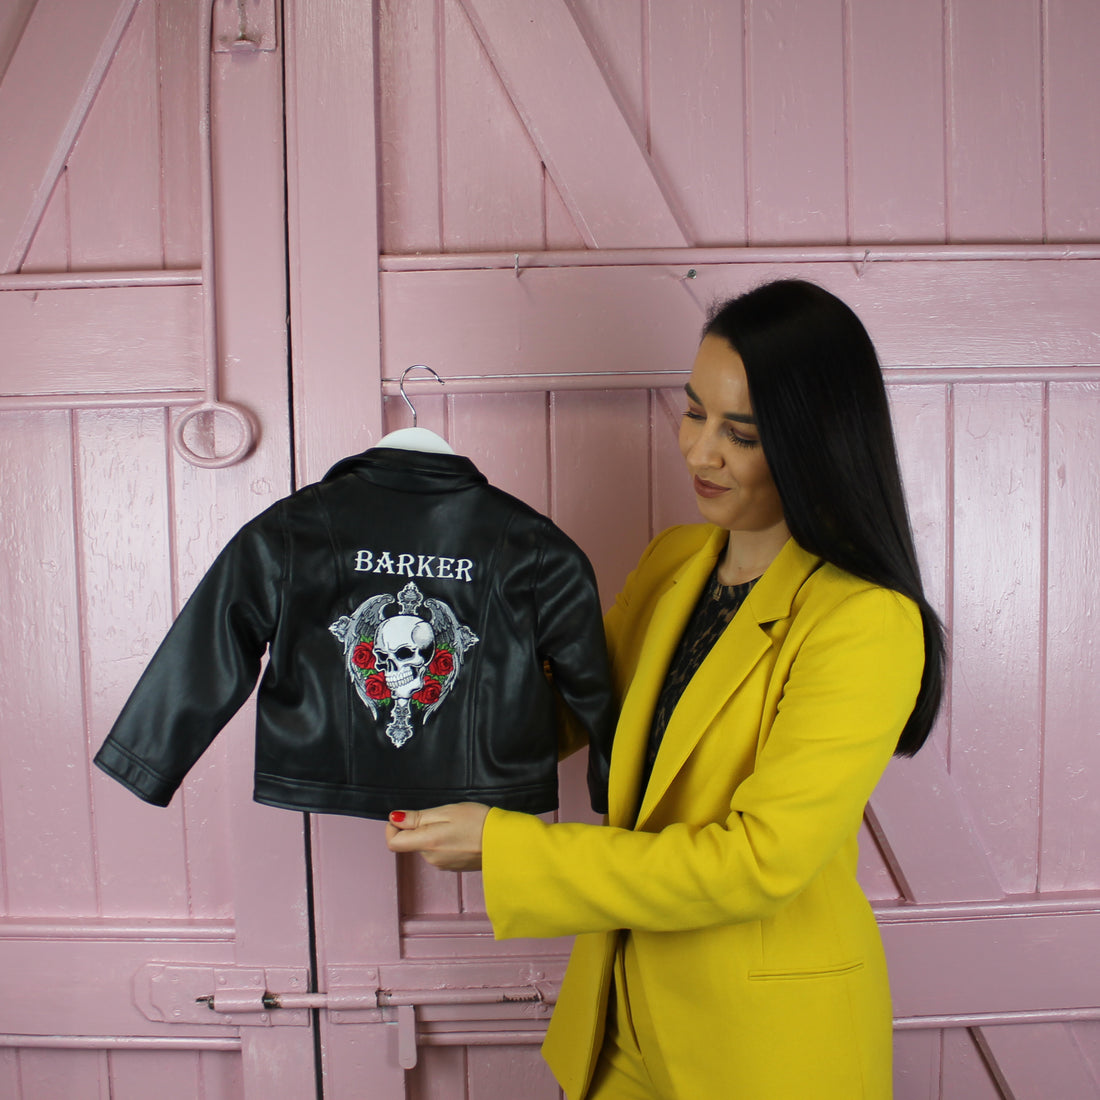 Meet the NI designer commissioned to make a jacket for Kourtney Kardashian's baby